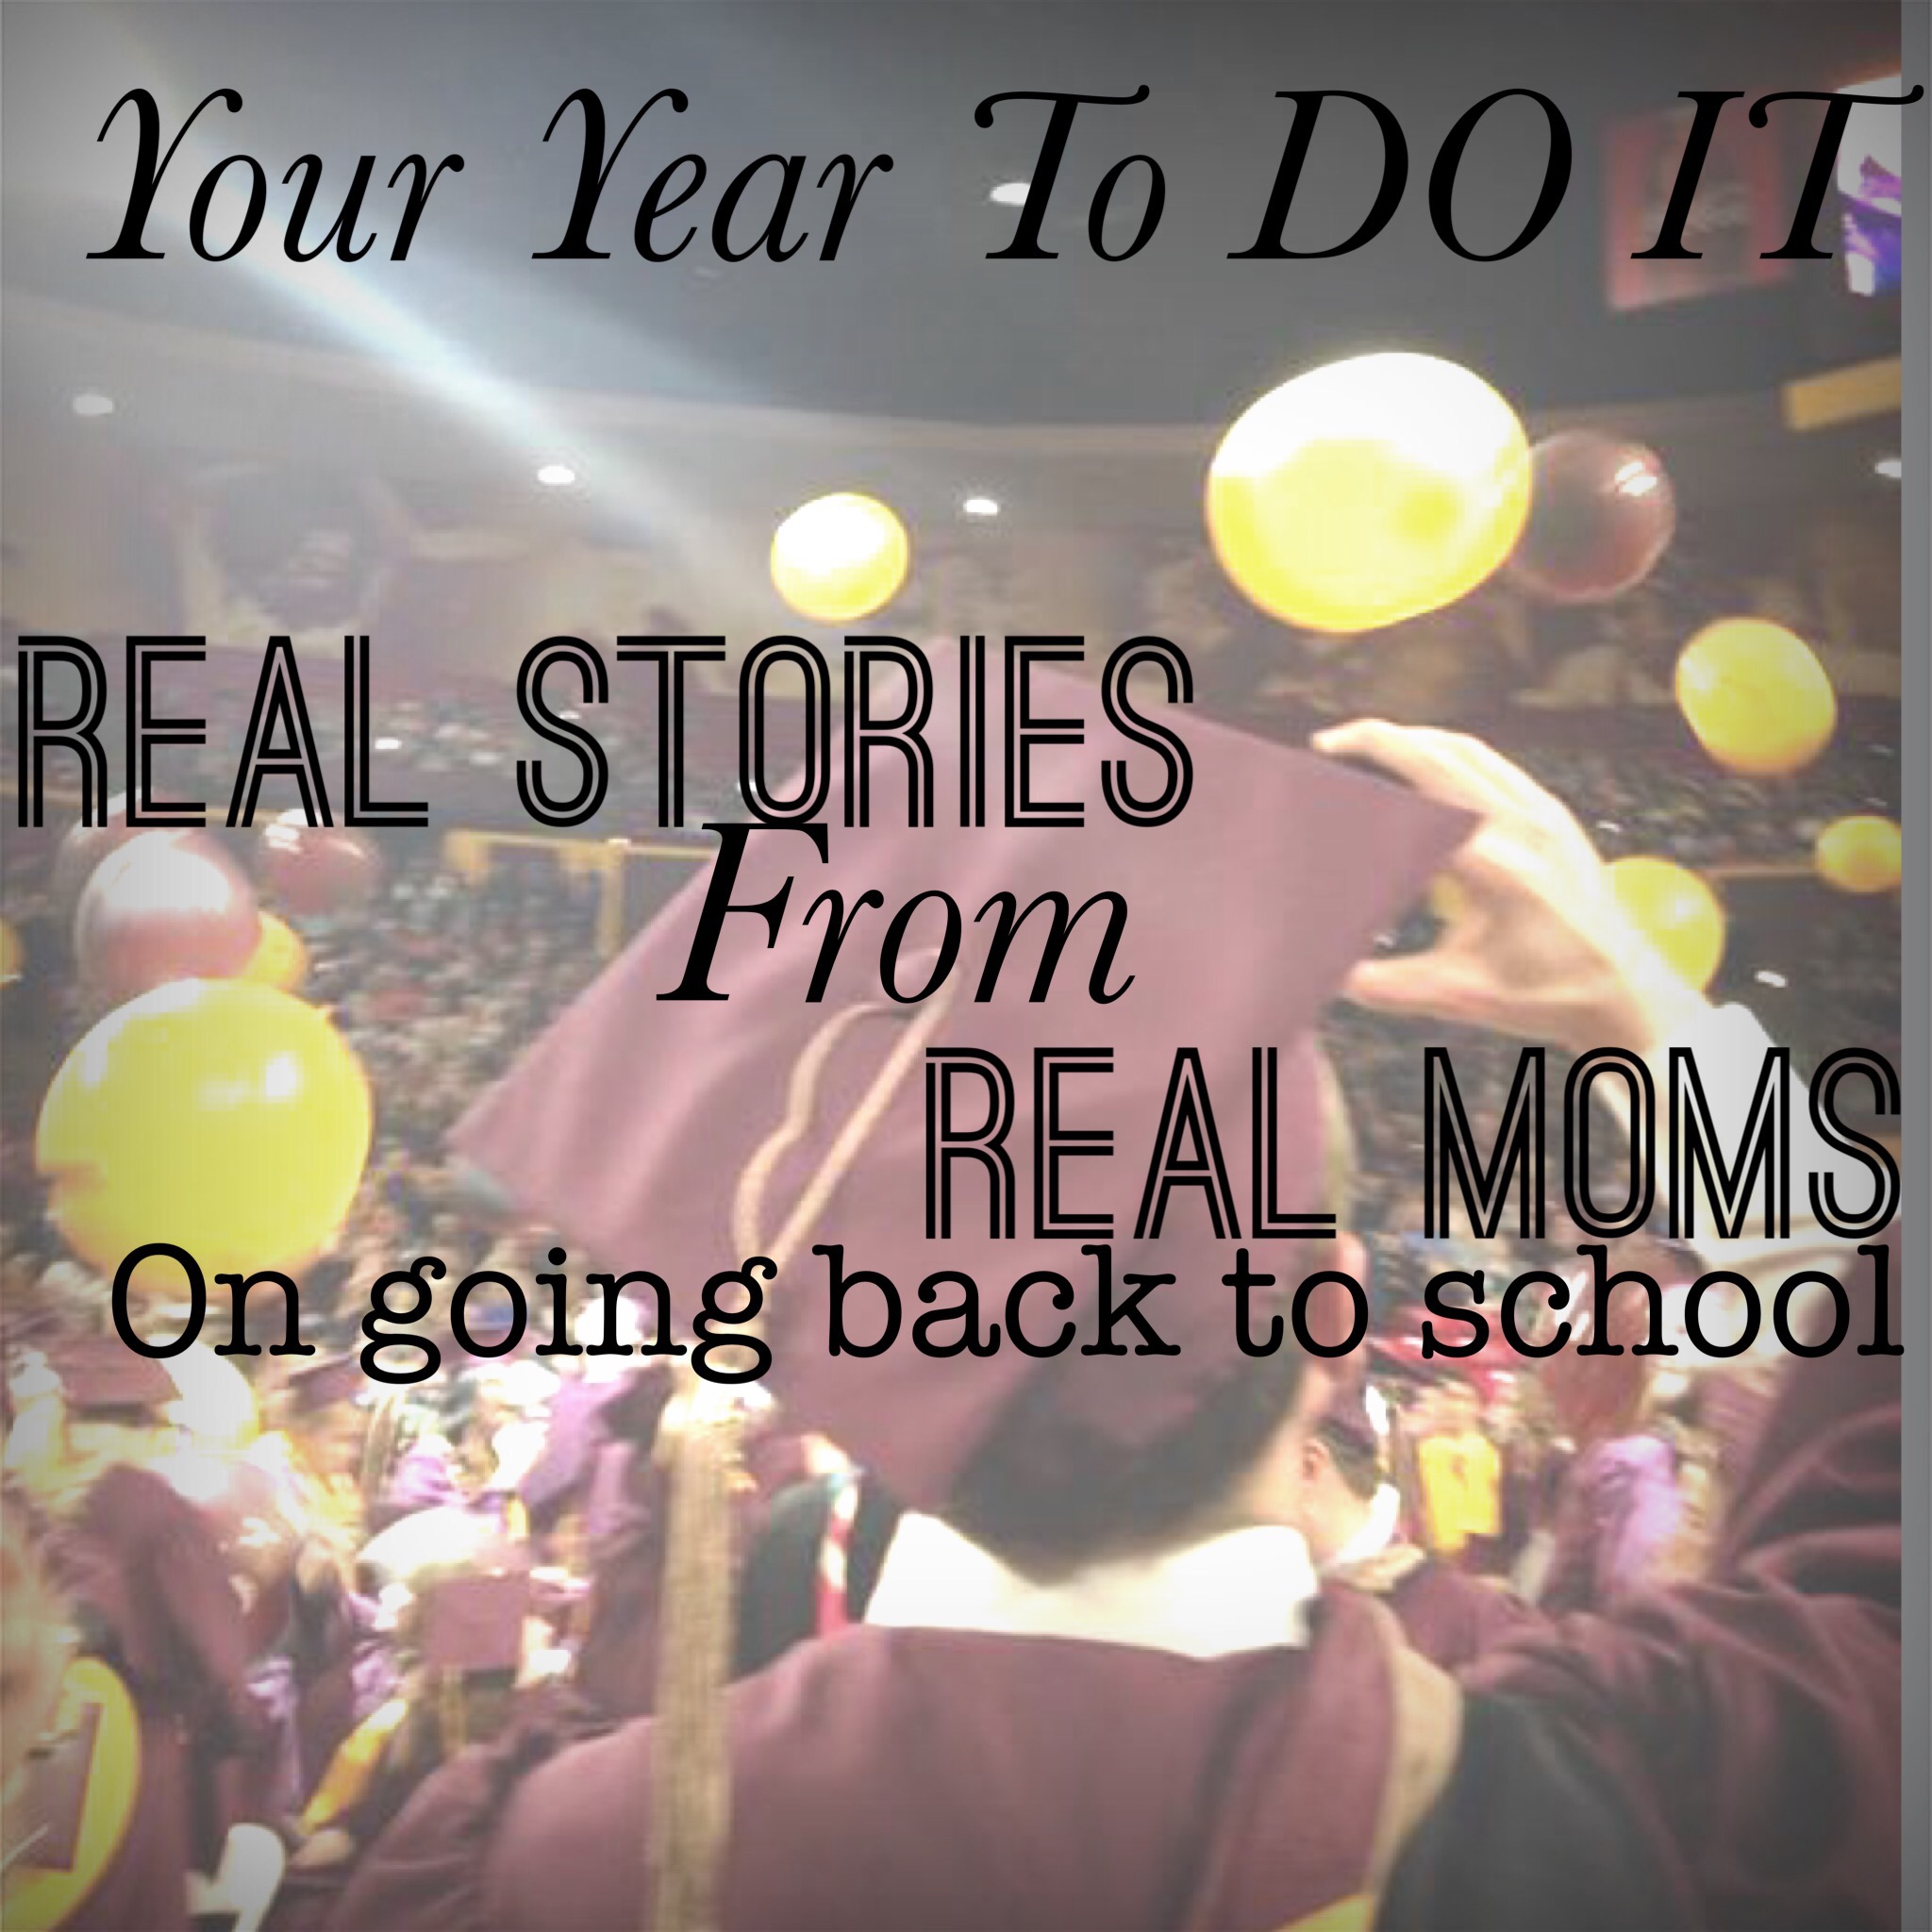 Your Year To Do It: Real Stories From Real Moms on Going Back To School